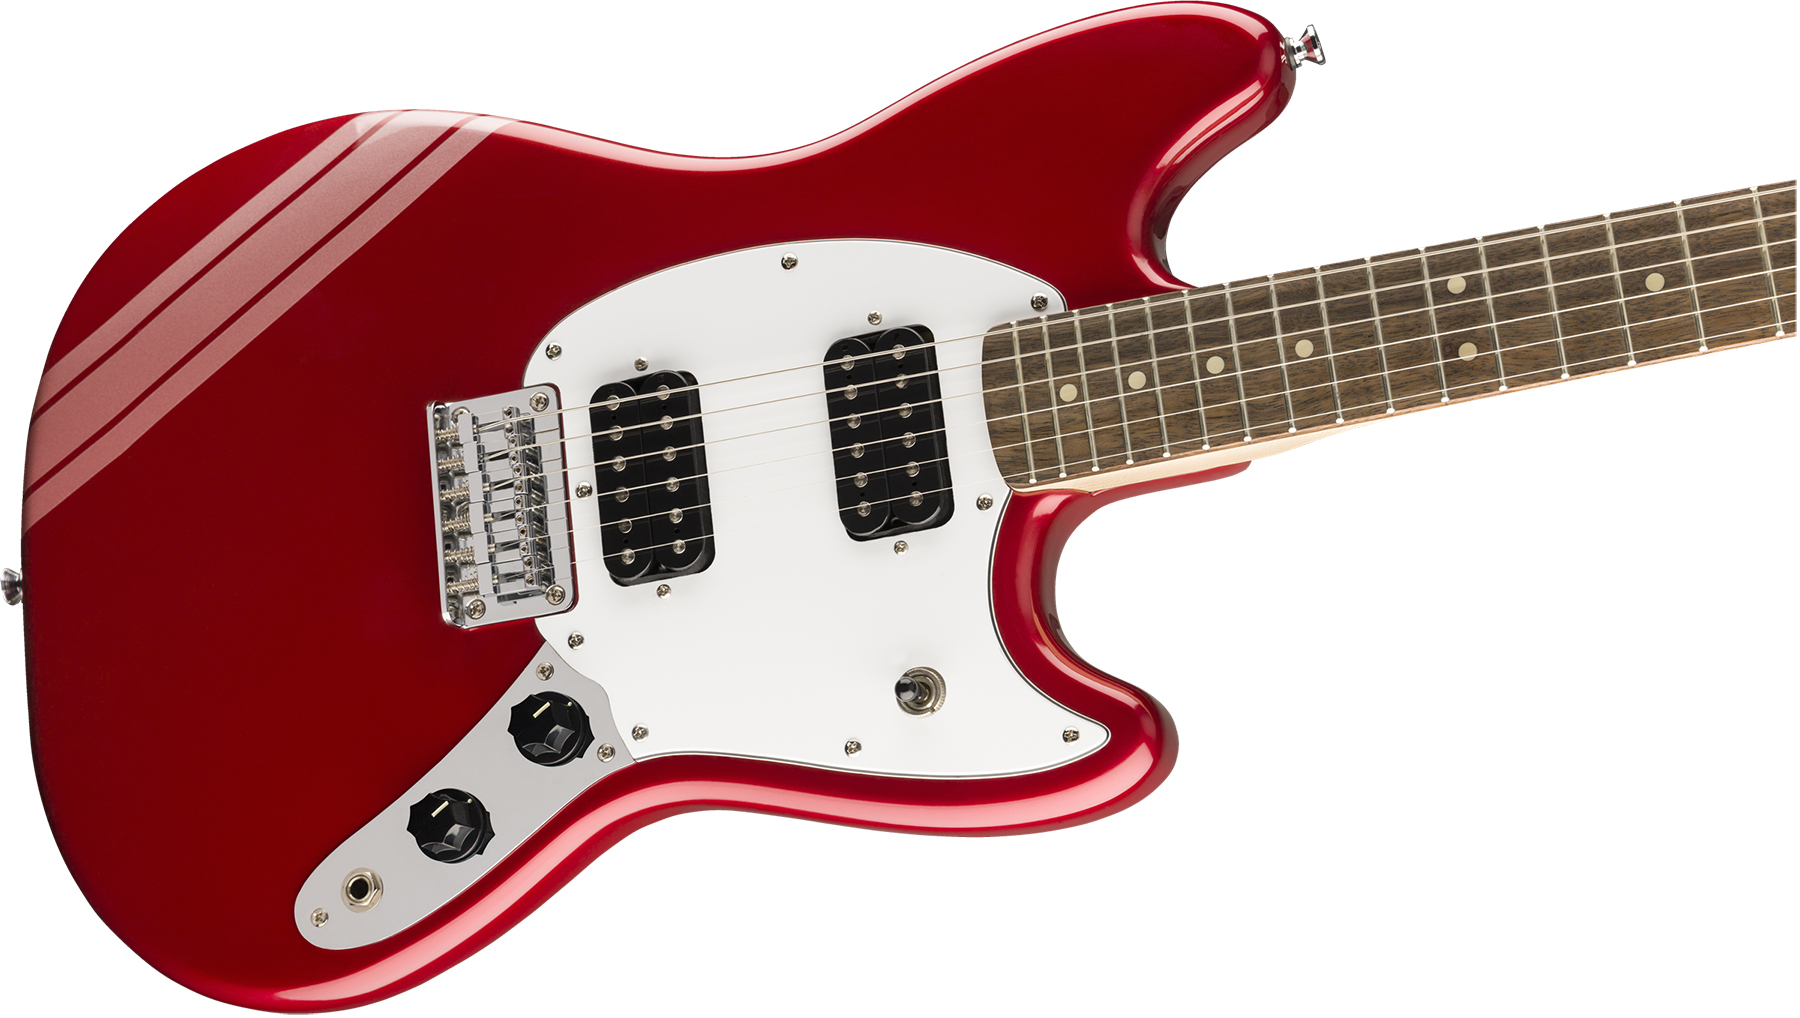 Squier Mustang Bullet Competition Hh Fsr Ht Lau - Candy Apple Red - Retro-Rock-E-Gitarre - Variation 2